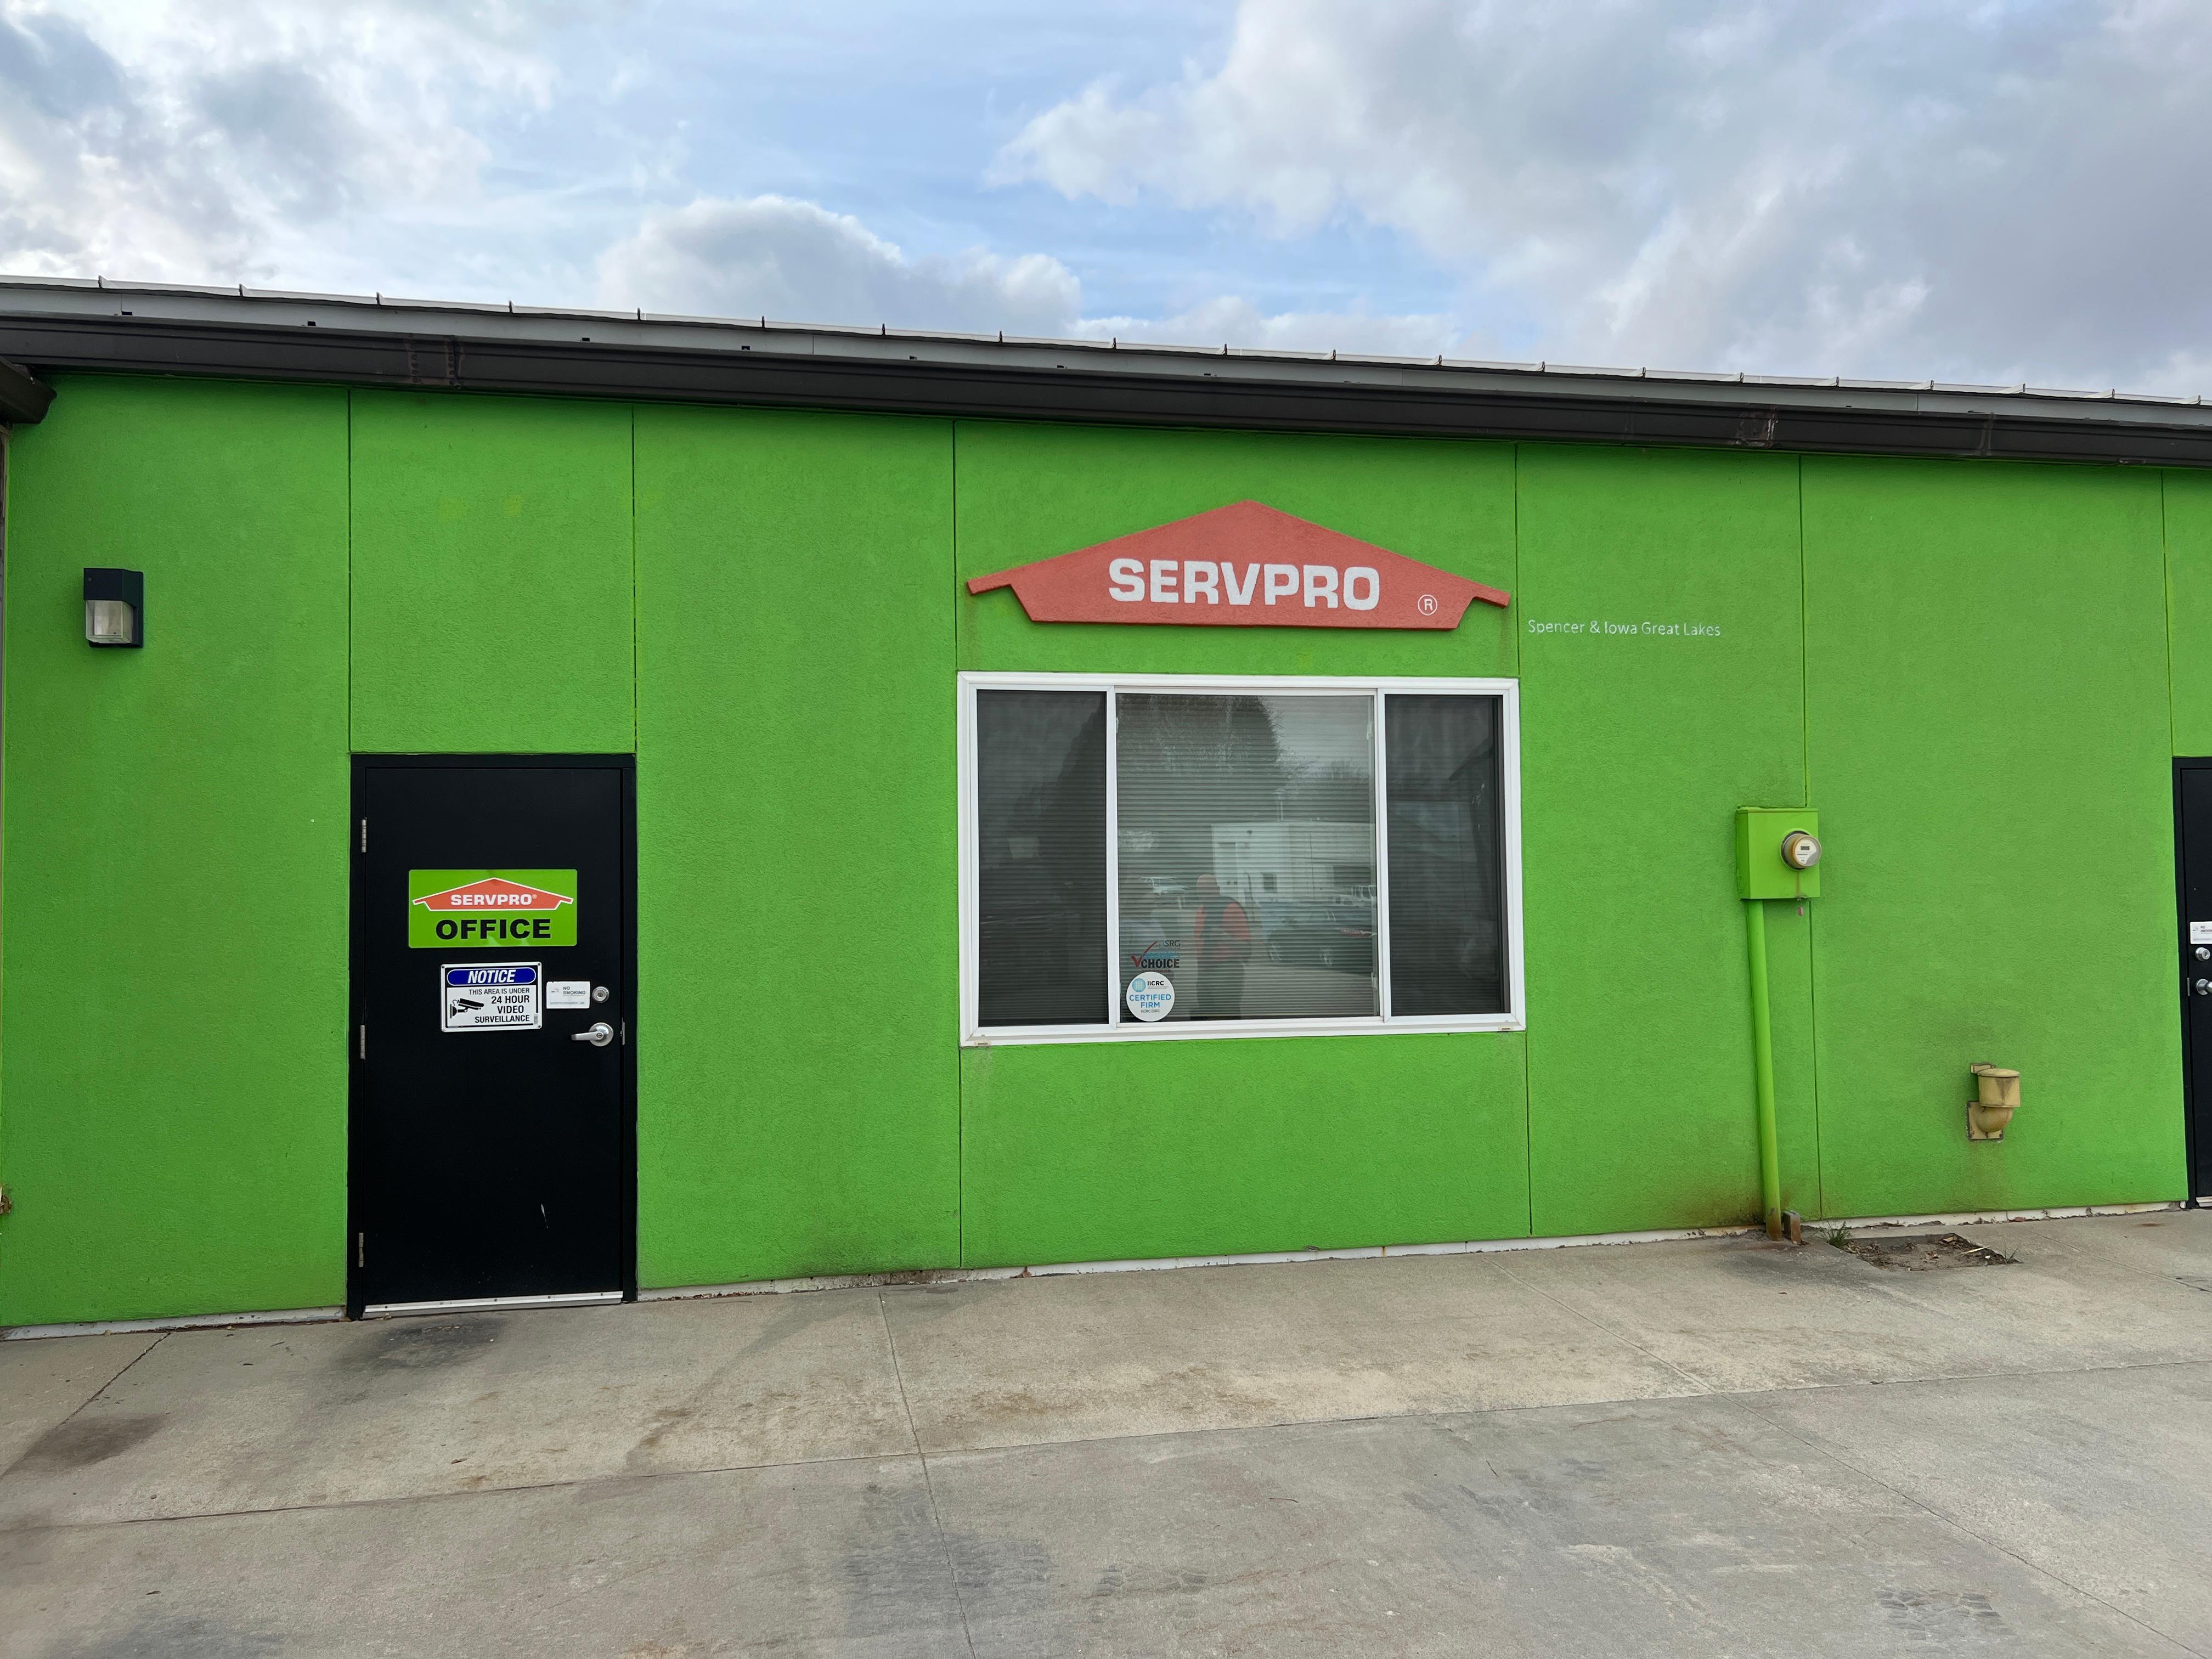 SERVPRO of Spencer & Iowa Great Lakes office entrance.